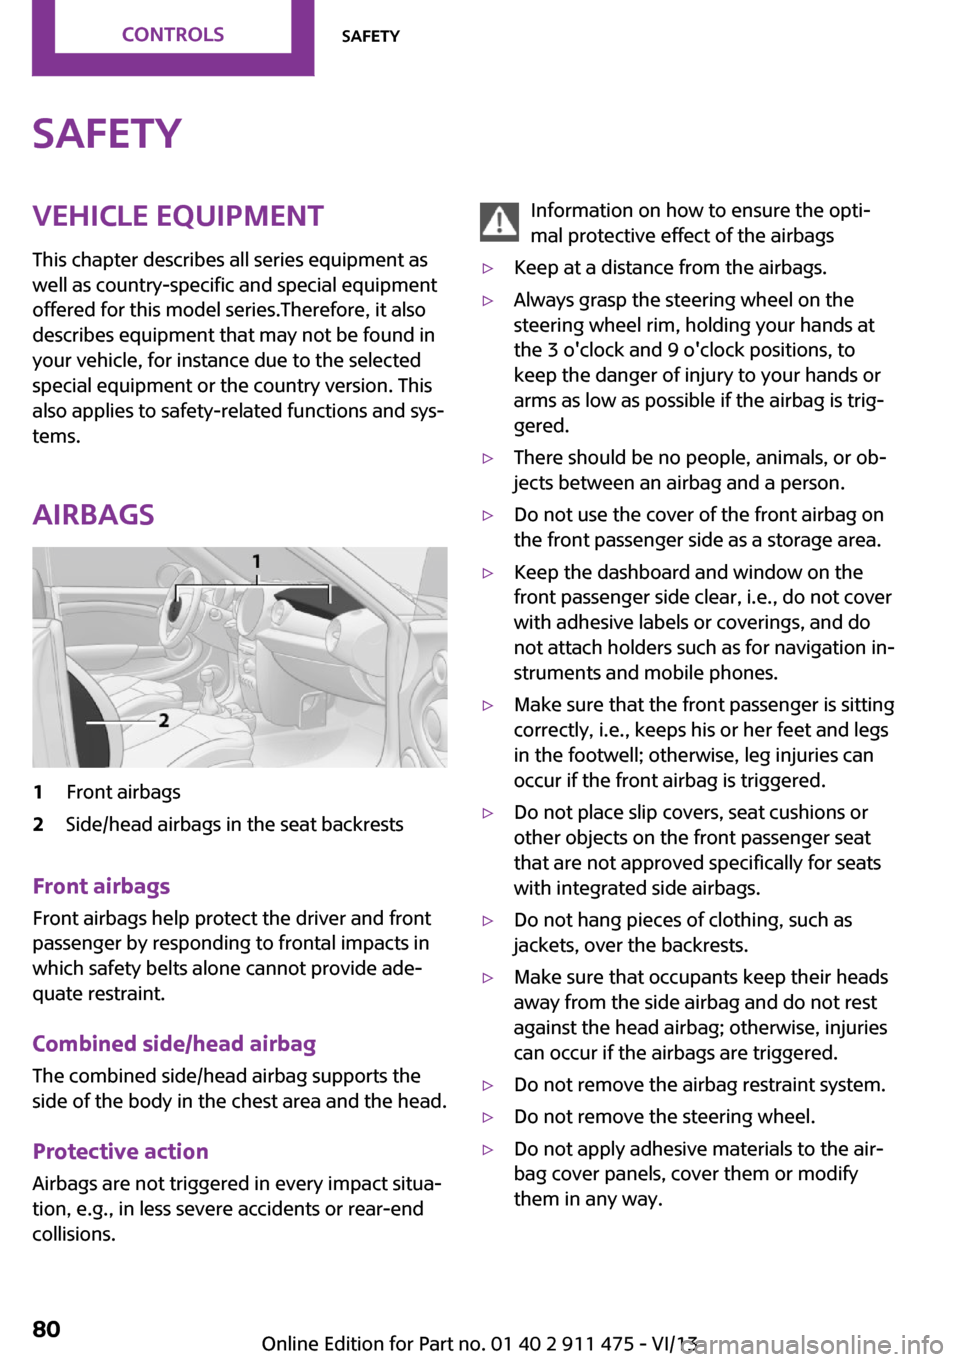 MINI Roadster 2014 Manual PDF SafetyVehicle equipment
This chapter describes all series equipment as
well as country-specific and special equipment
offered for this model series.Therefore, it also
describes equipment that may not 